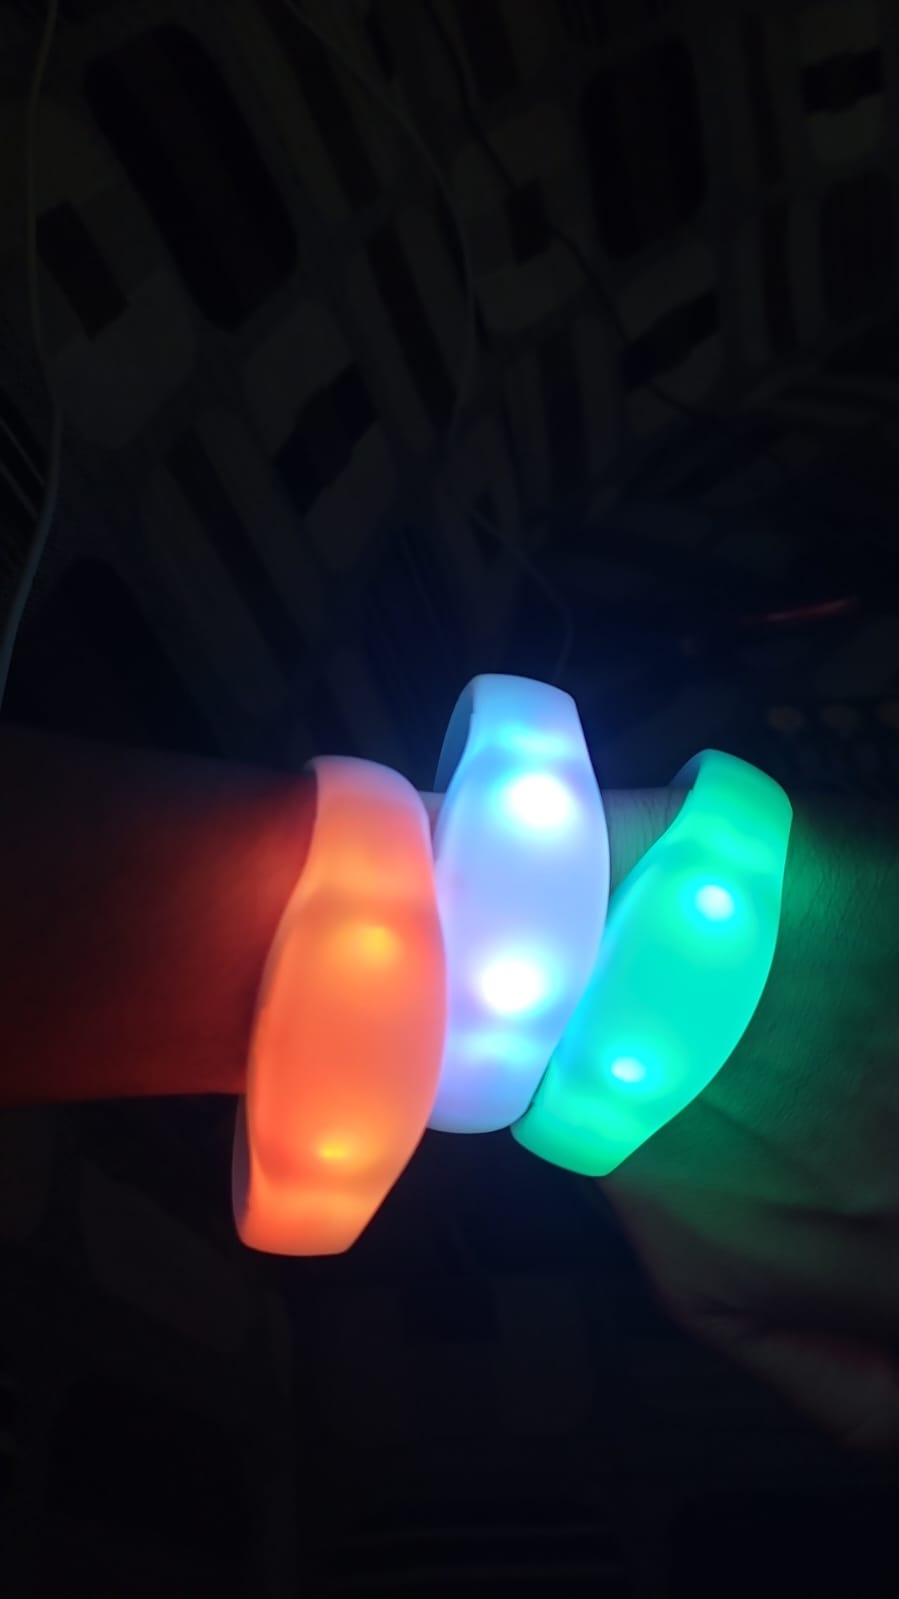 NTH LED Wristbands | Not That High